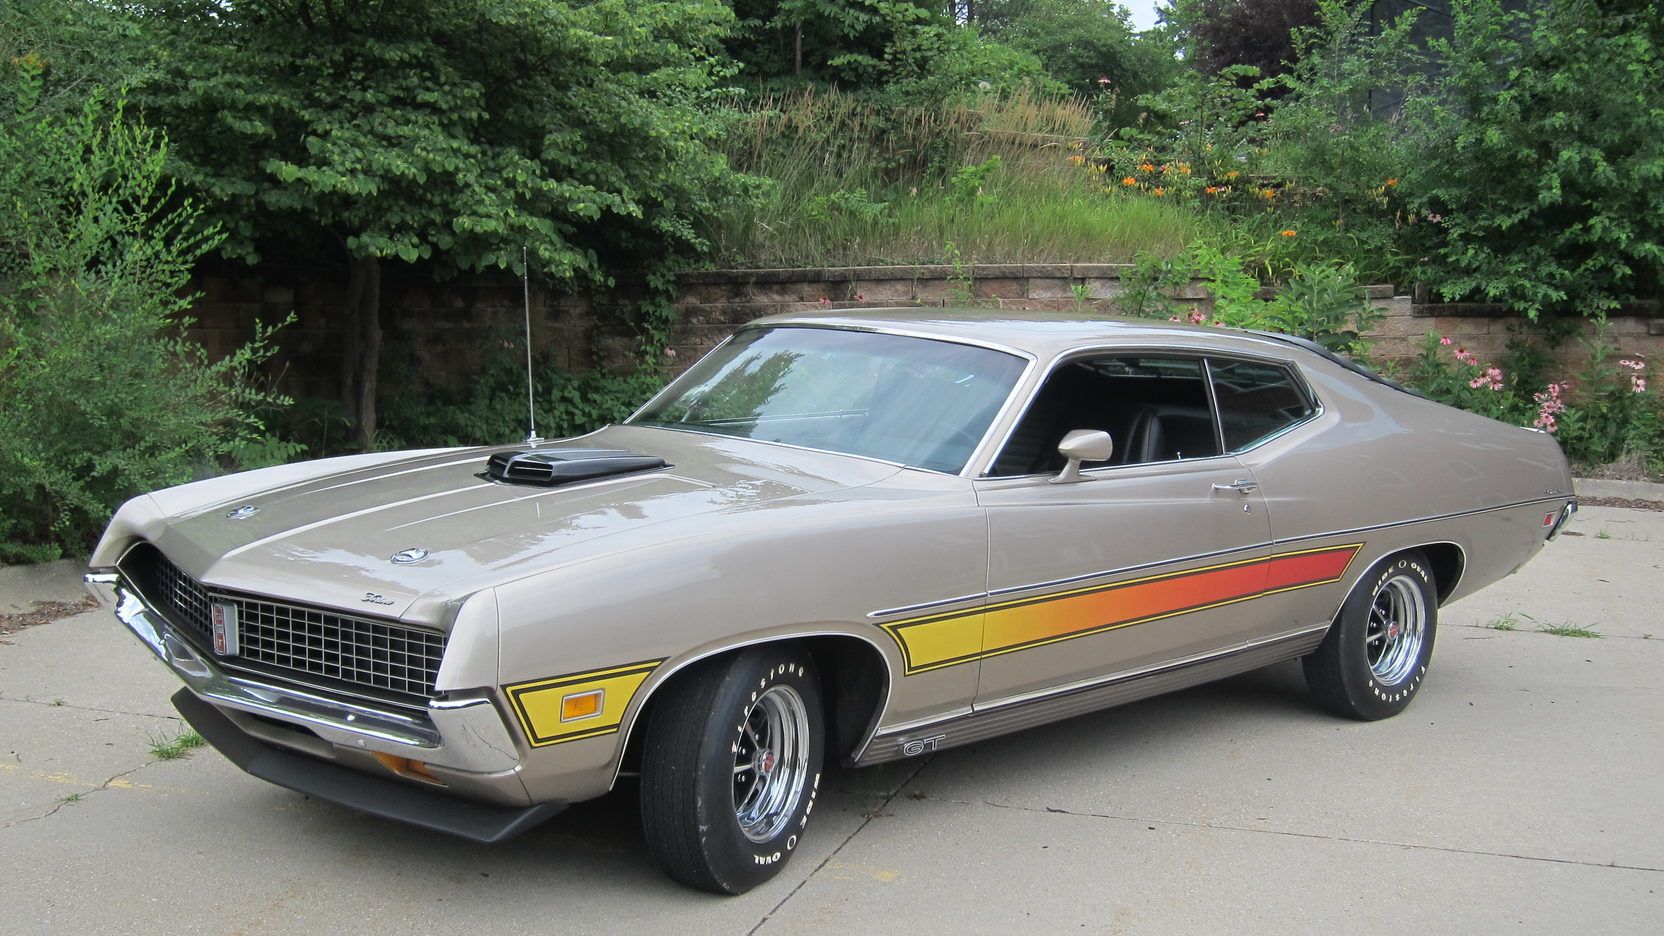 A arked 1971 Ford Torino GT